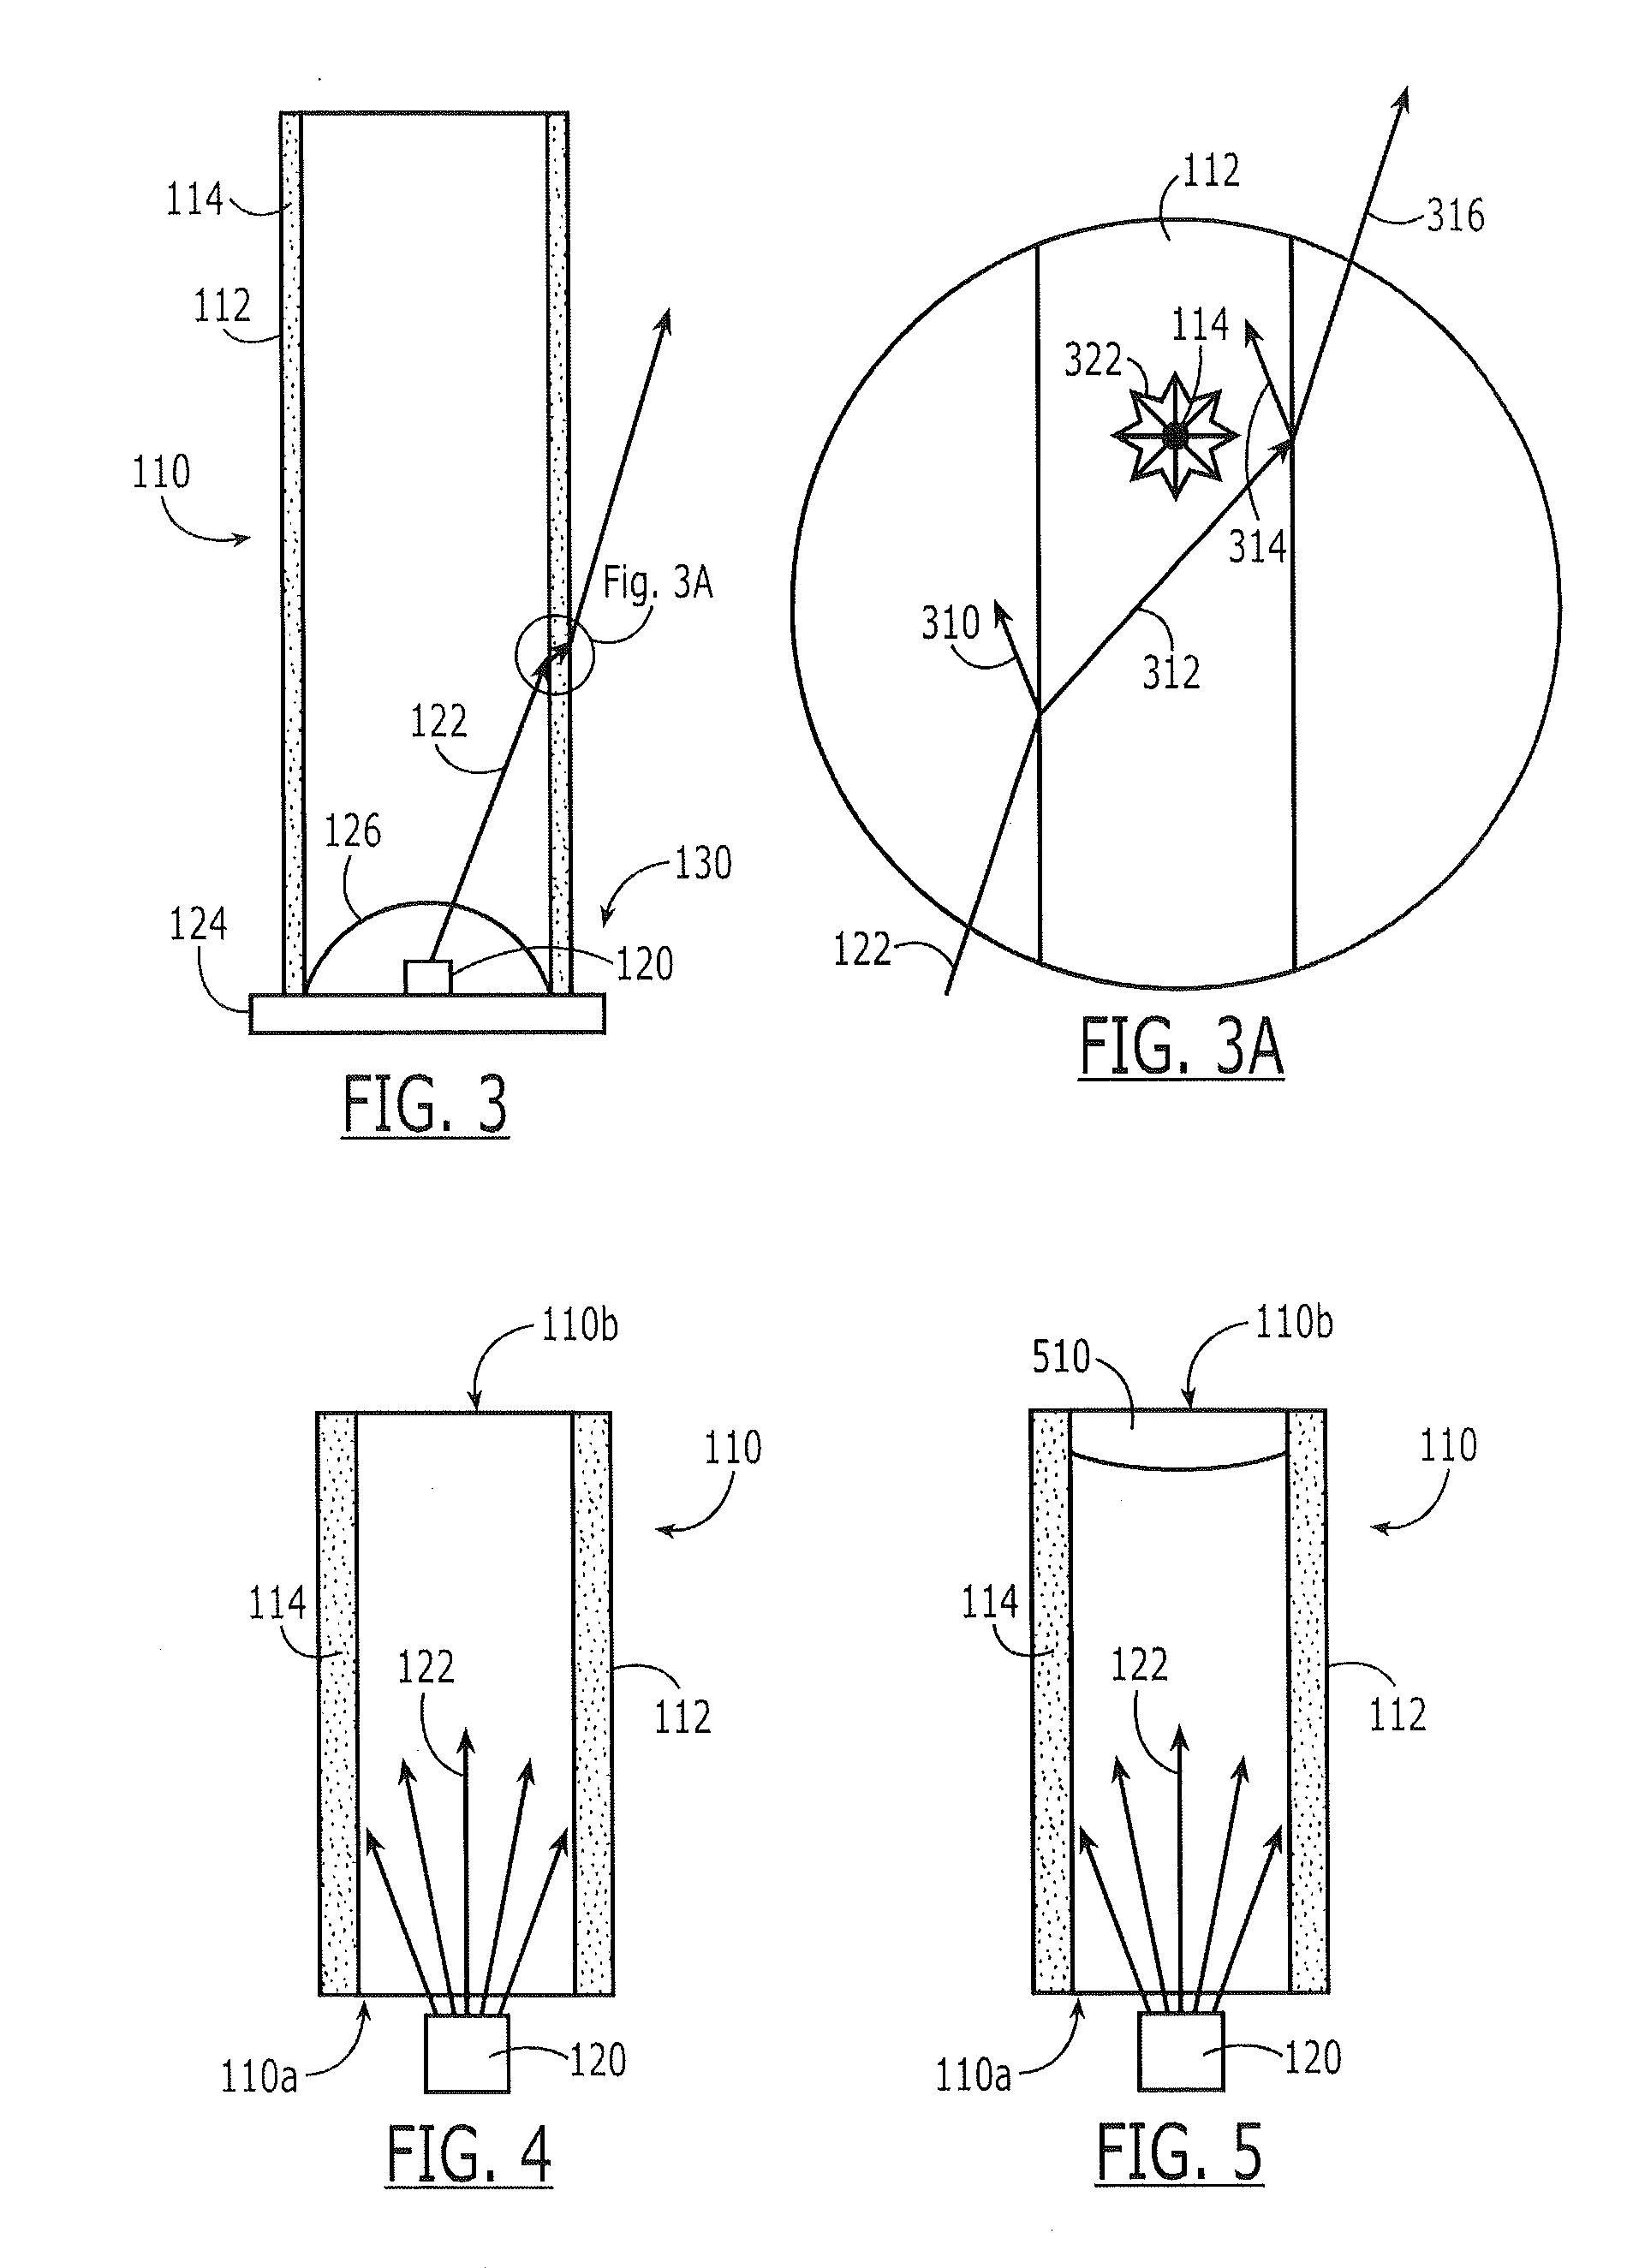 Ultra-high efficacy semiconductor light emitting devices